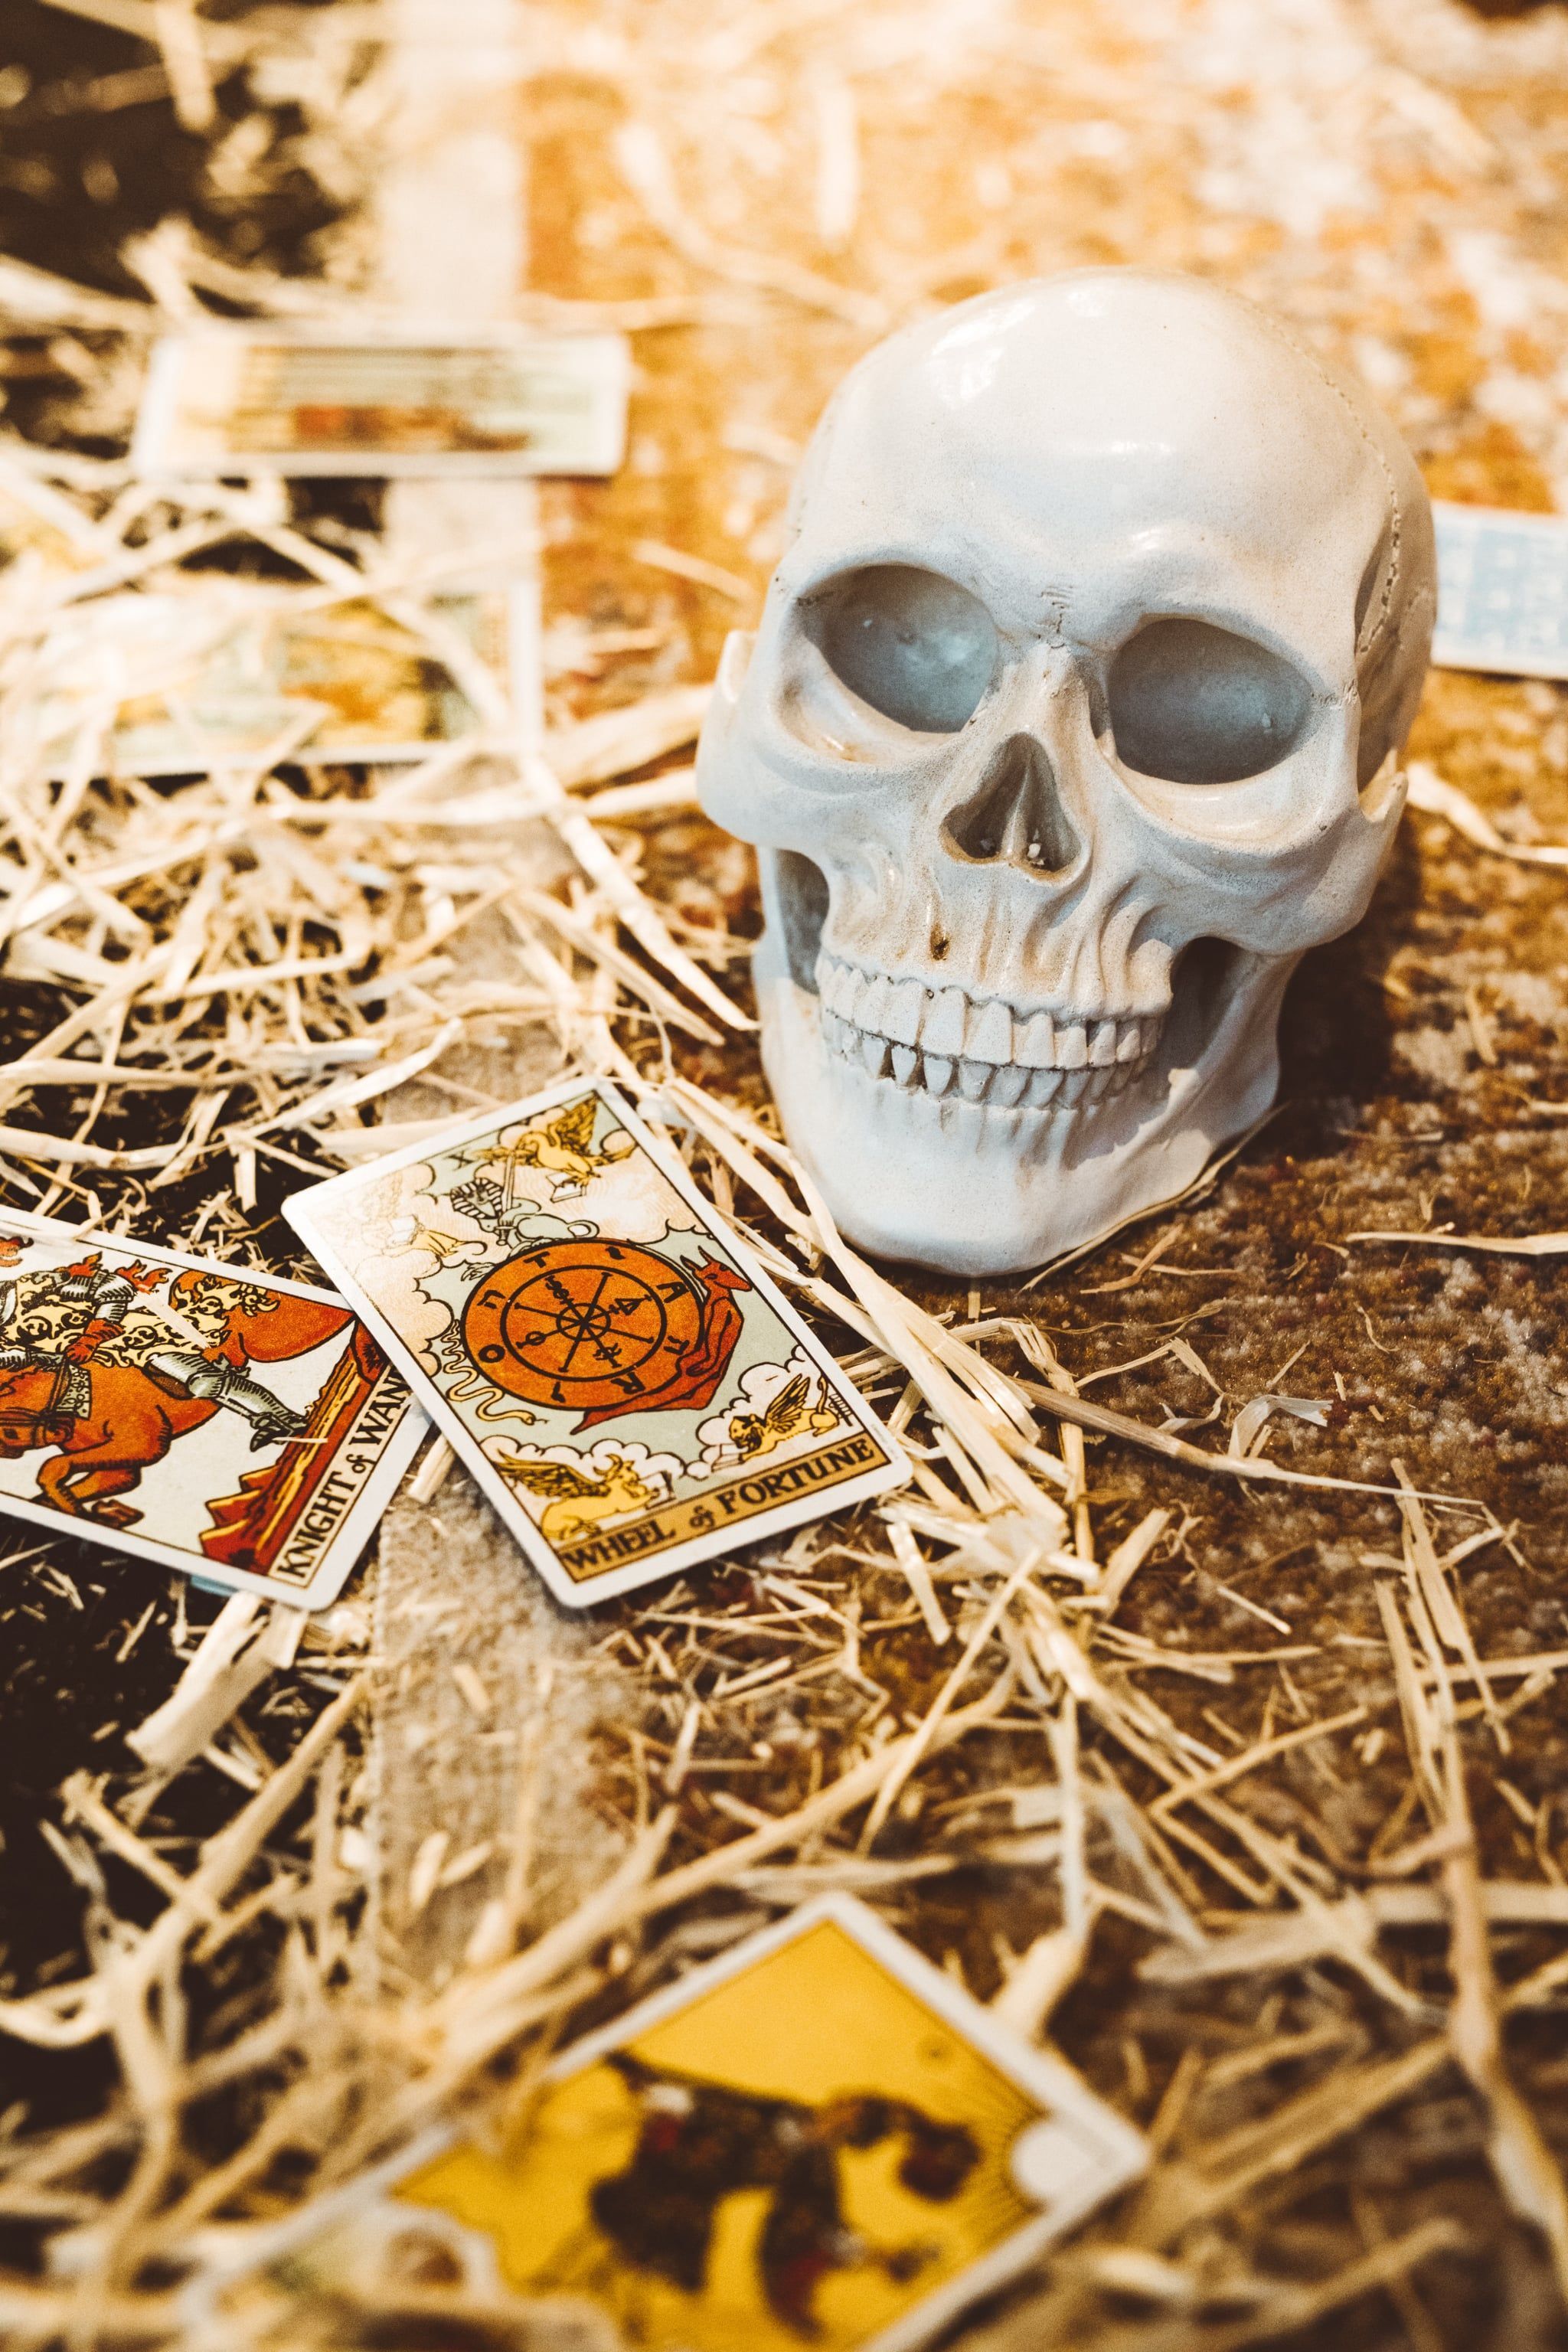 A skull and tarot cards on a straw covered table. - Halloween, creepy, skull, skeleton, spooky